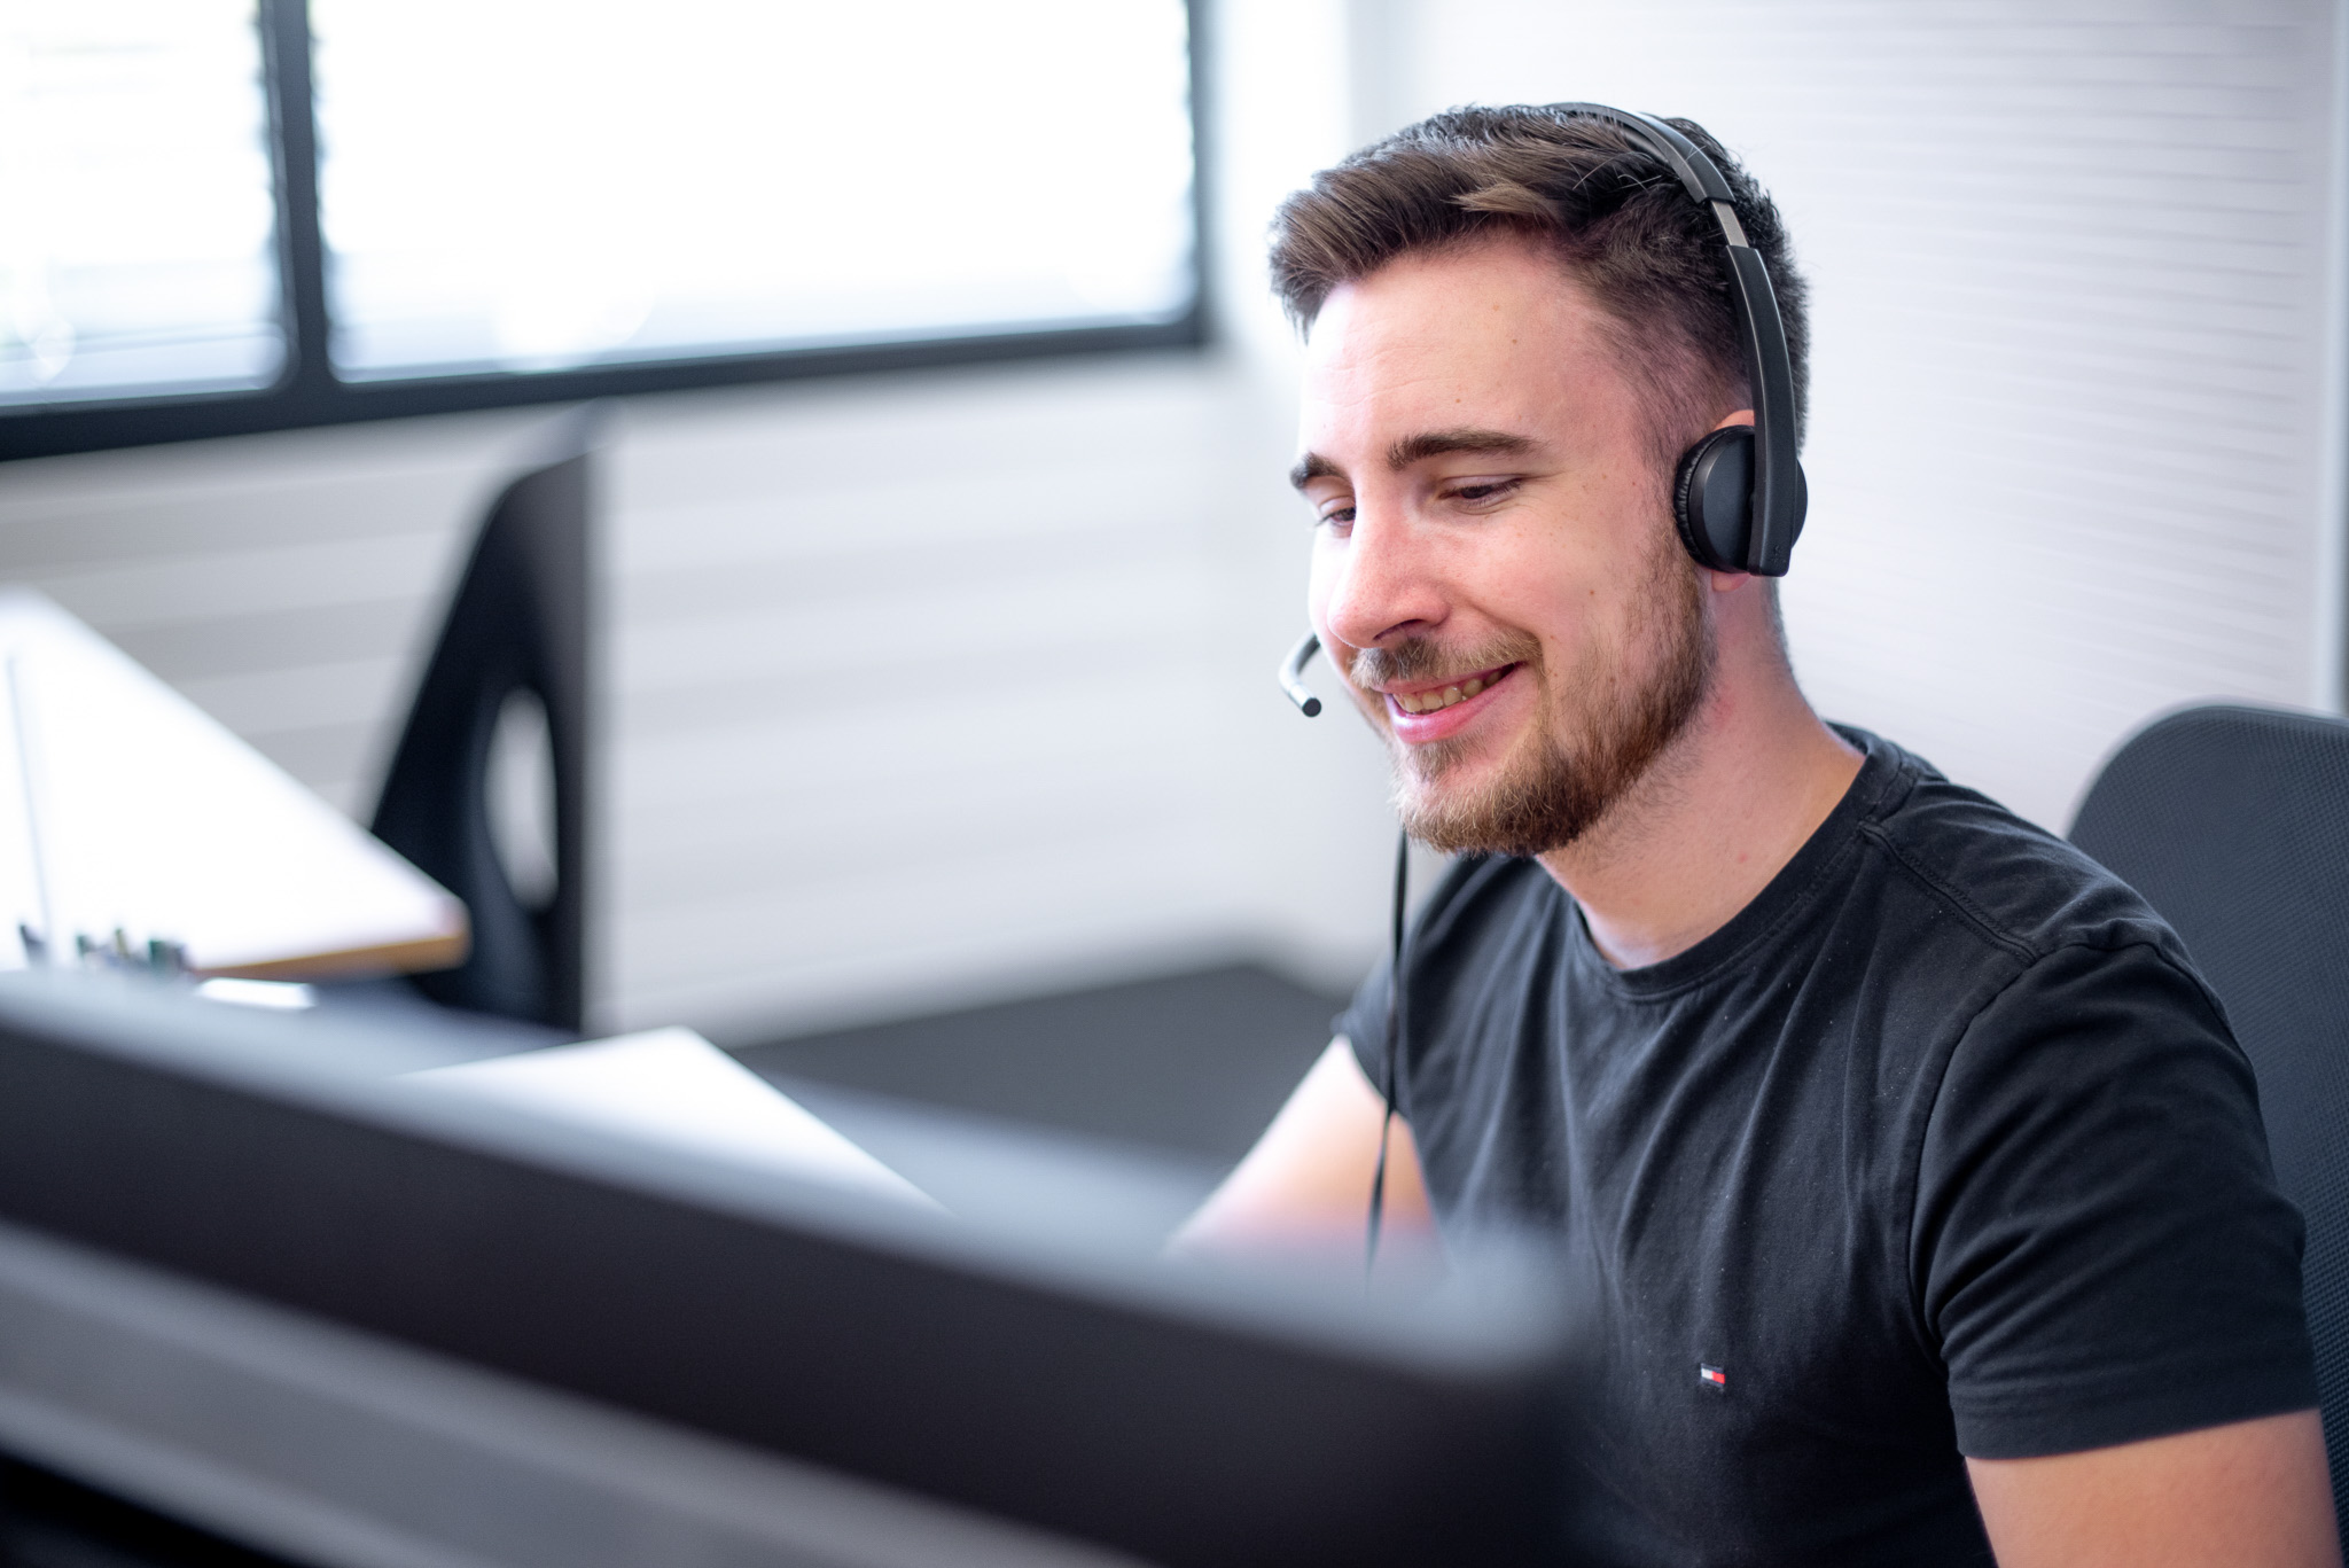 Employee with headset smiling at the computer